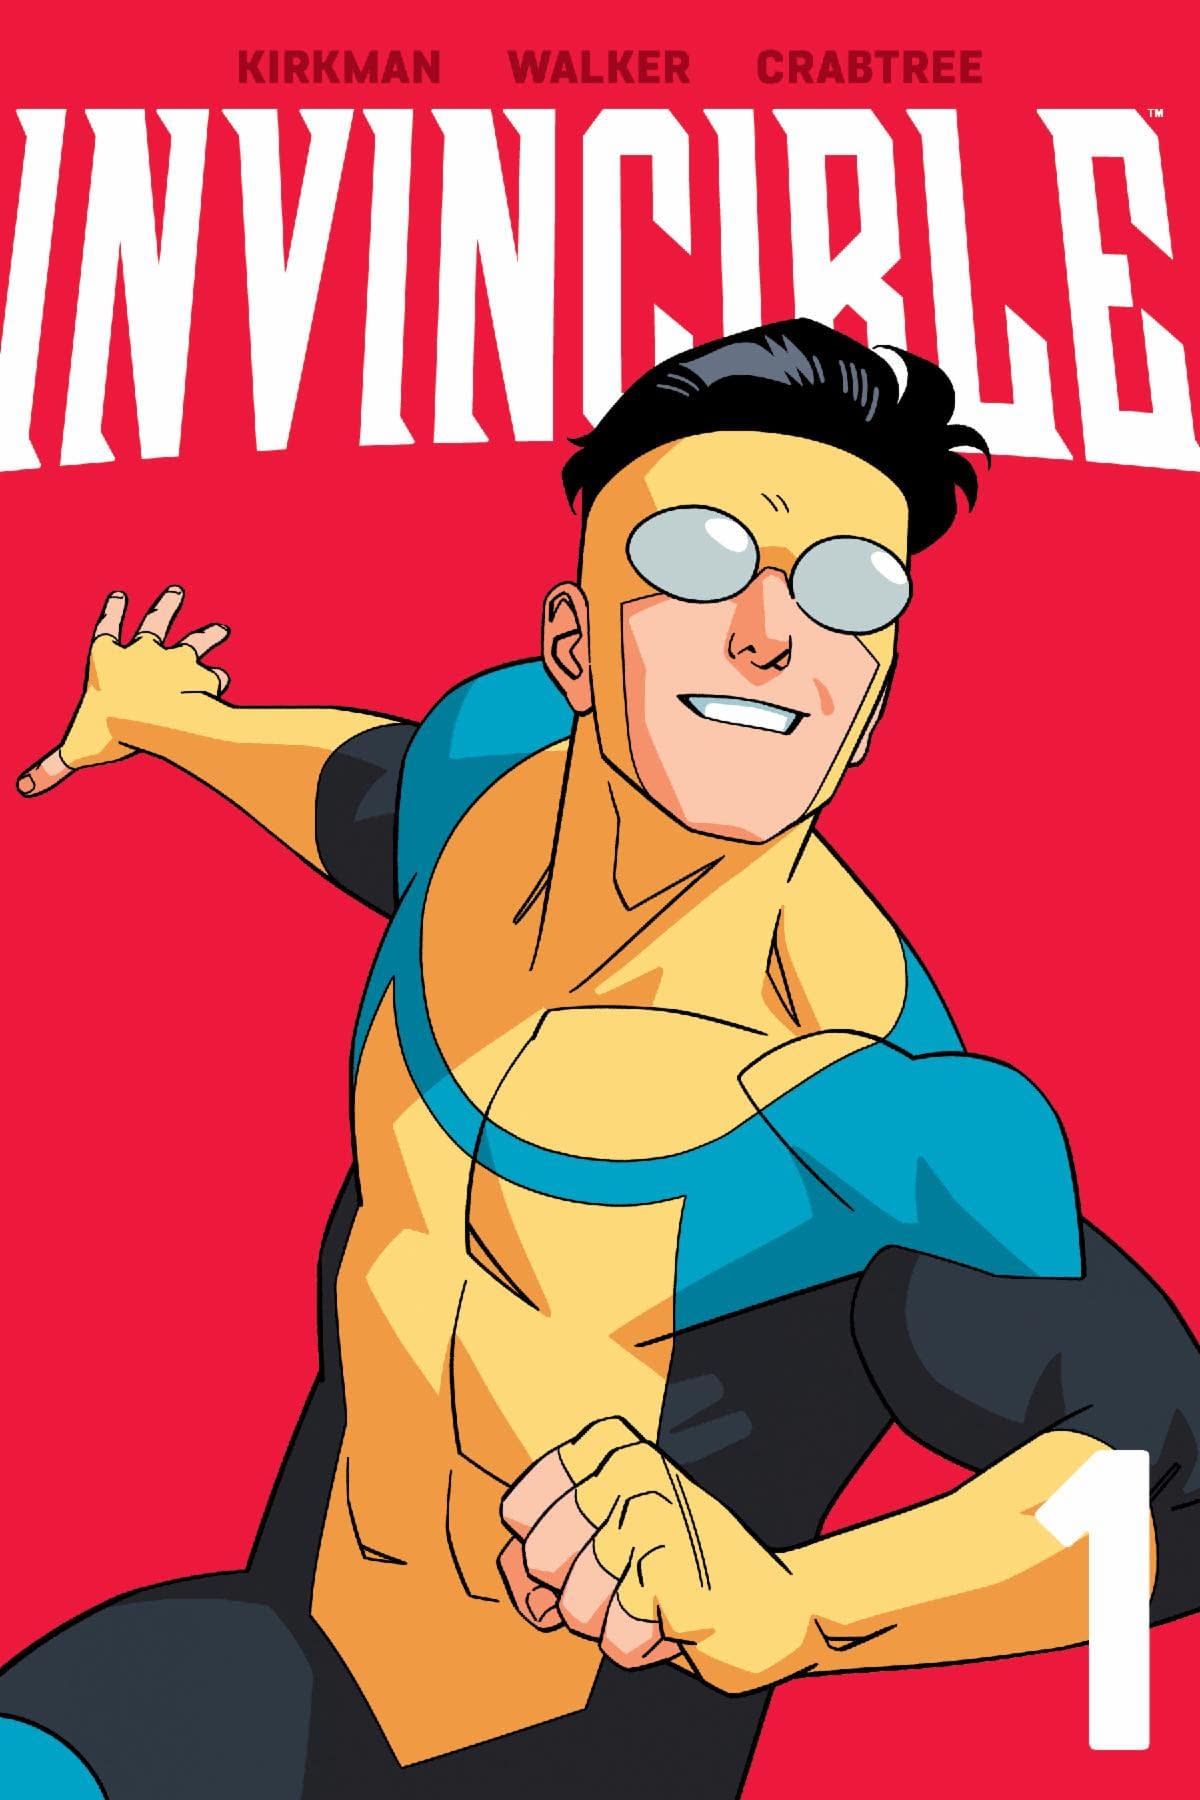 Invincible' gets spin-off game following Atom Eve